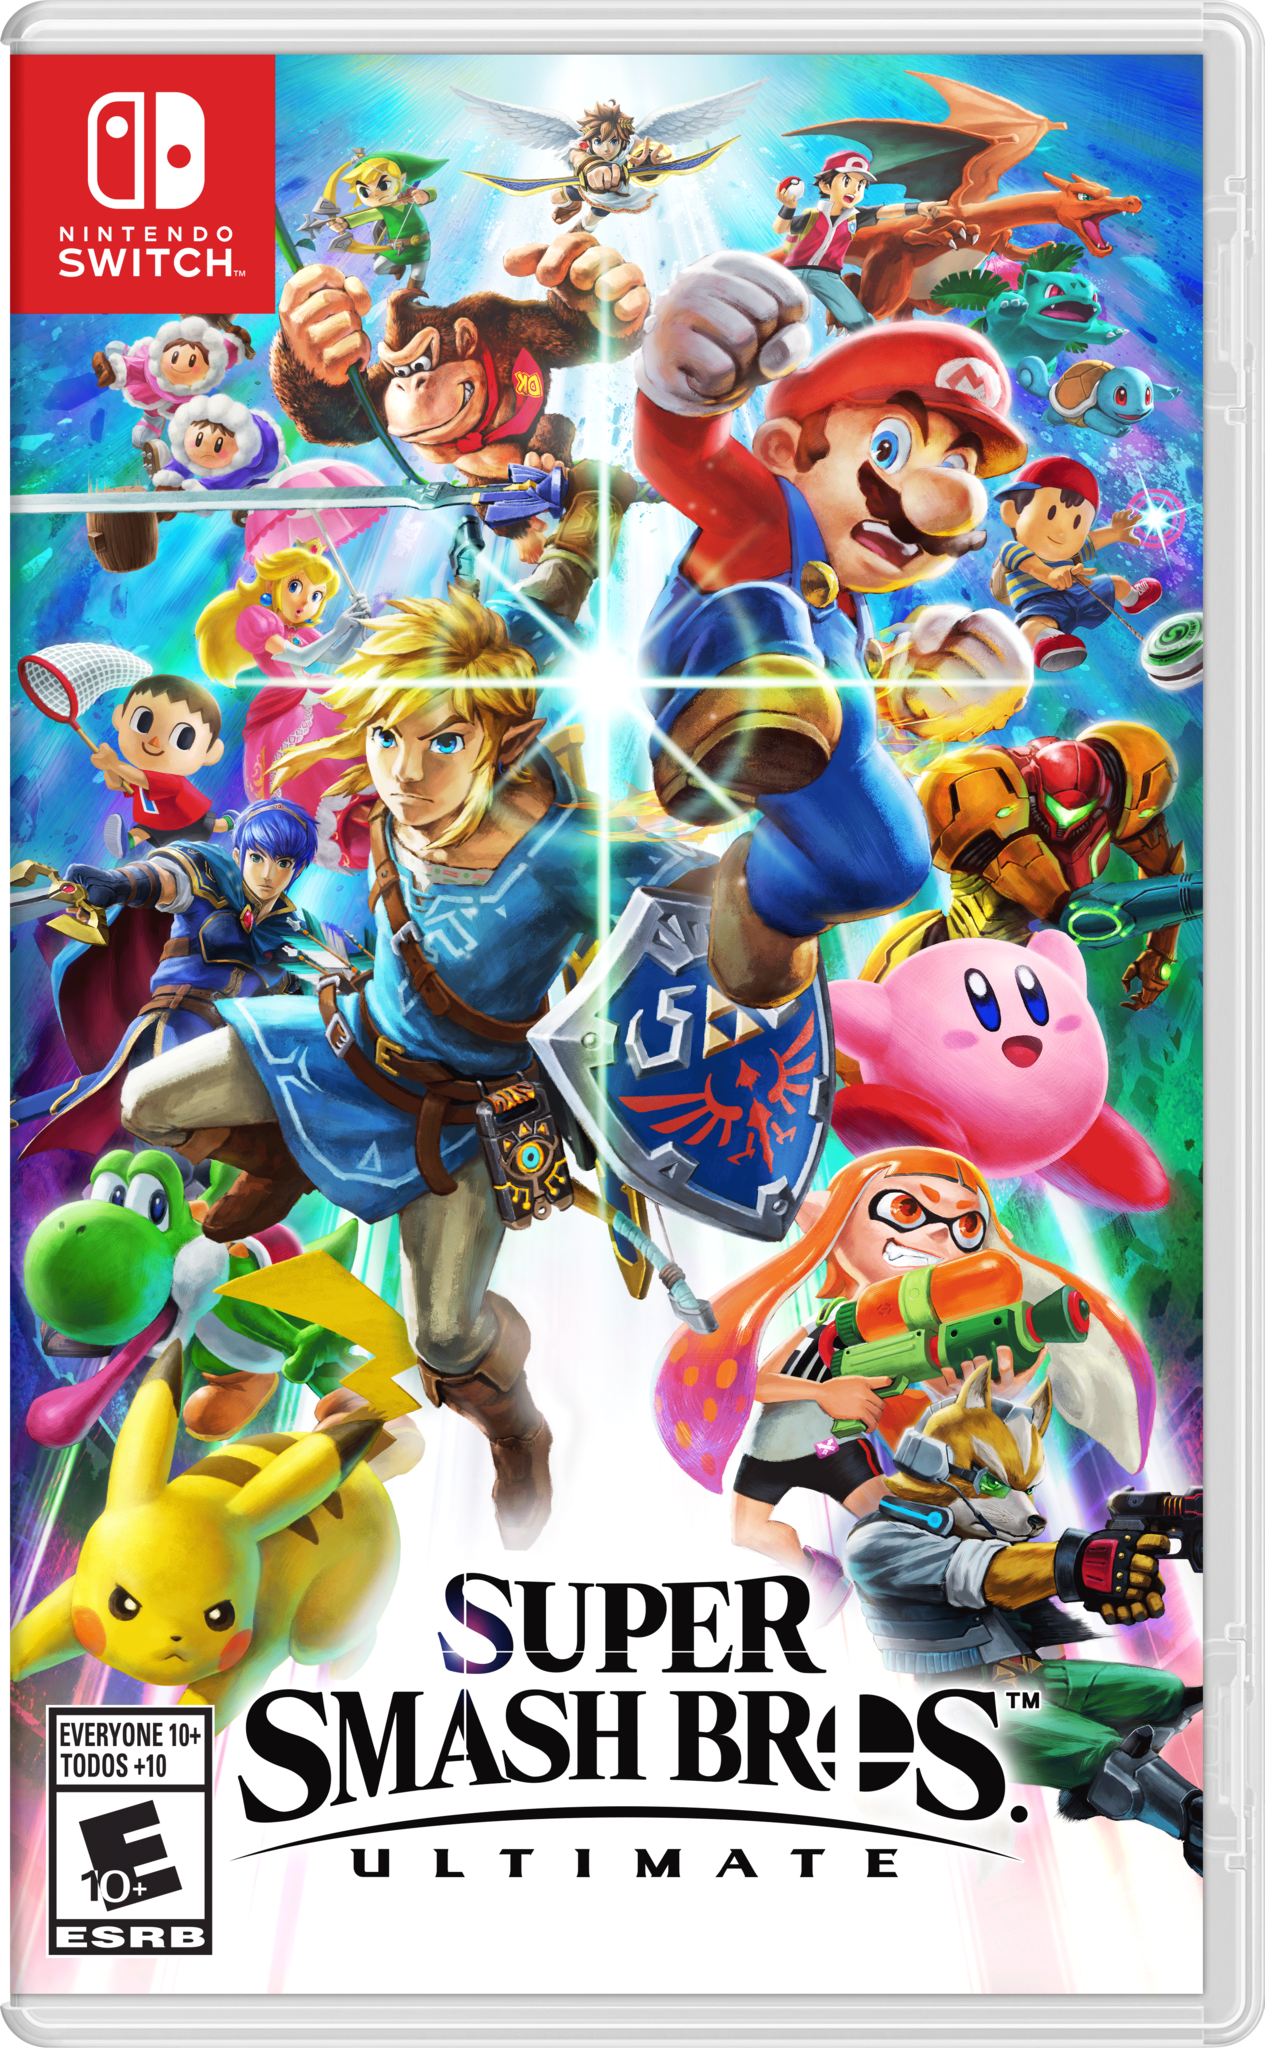 Super Smash Bros. Ultimate on Switch